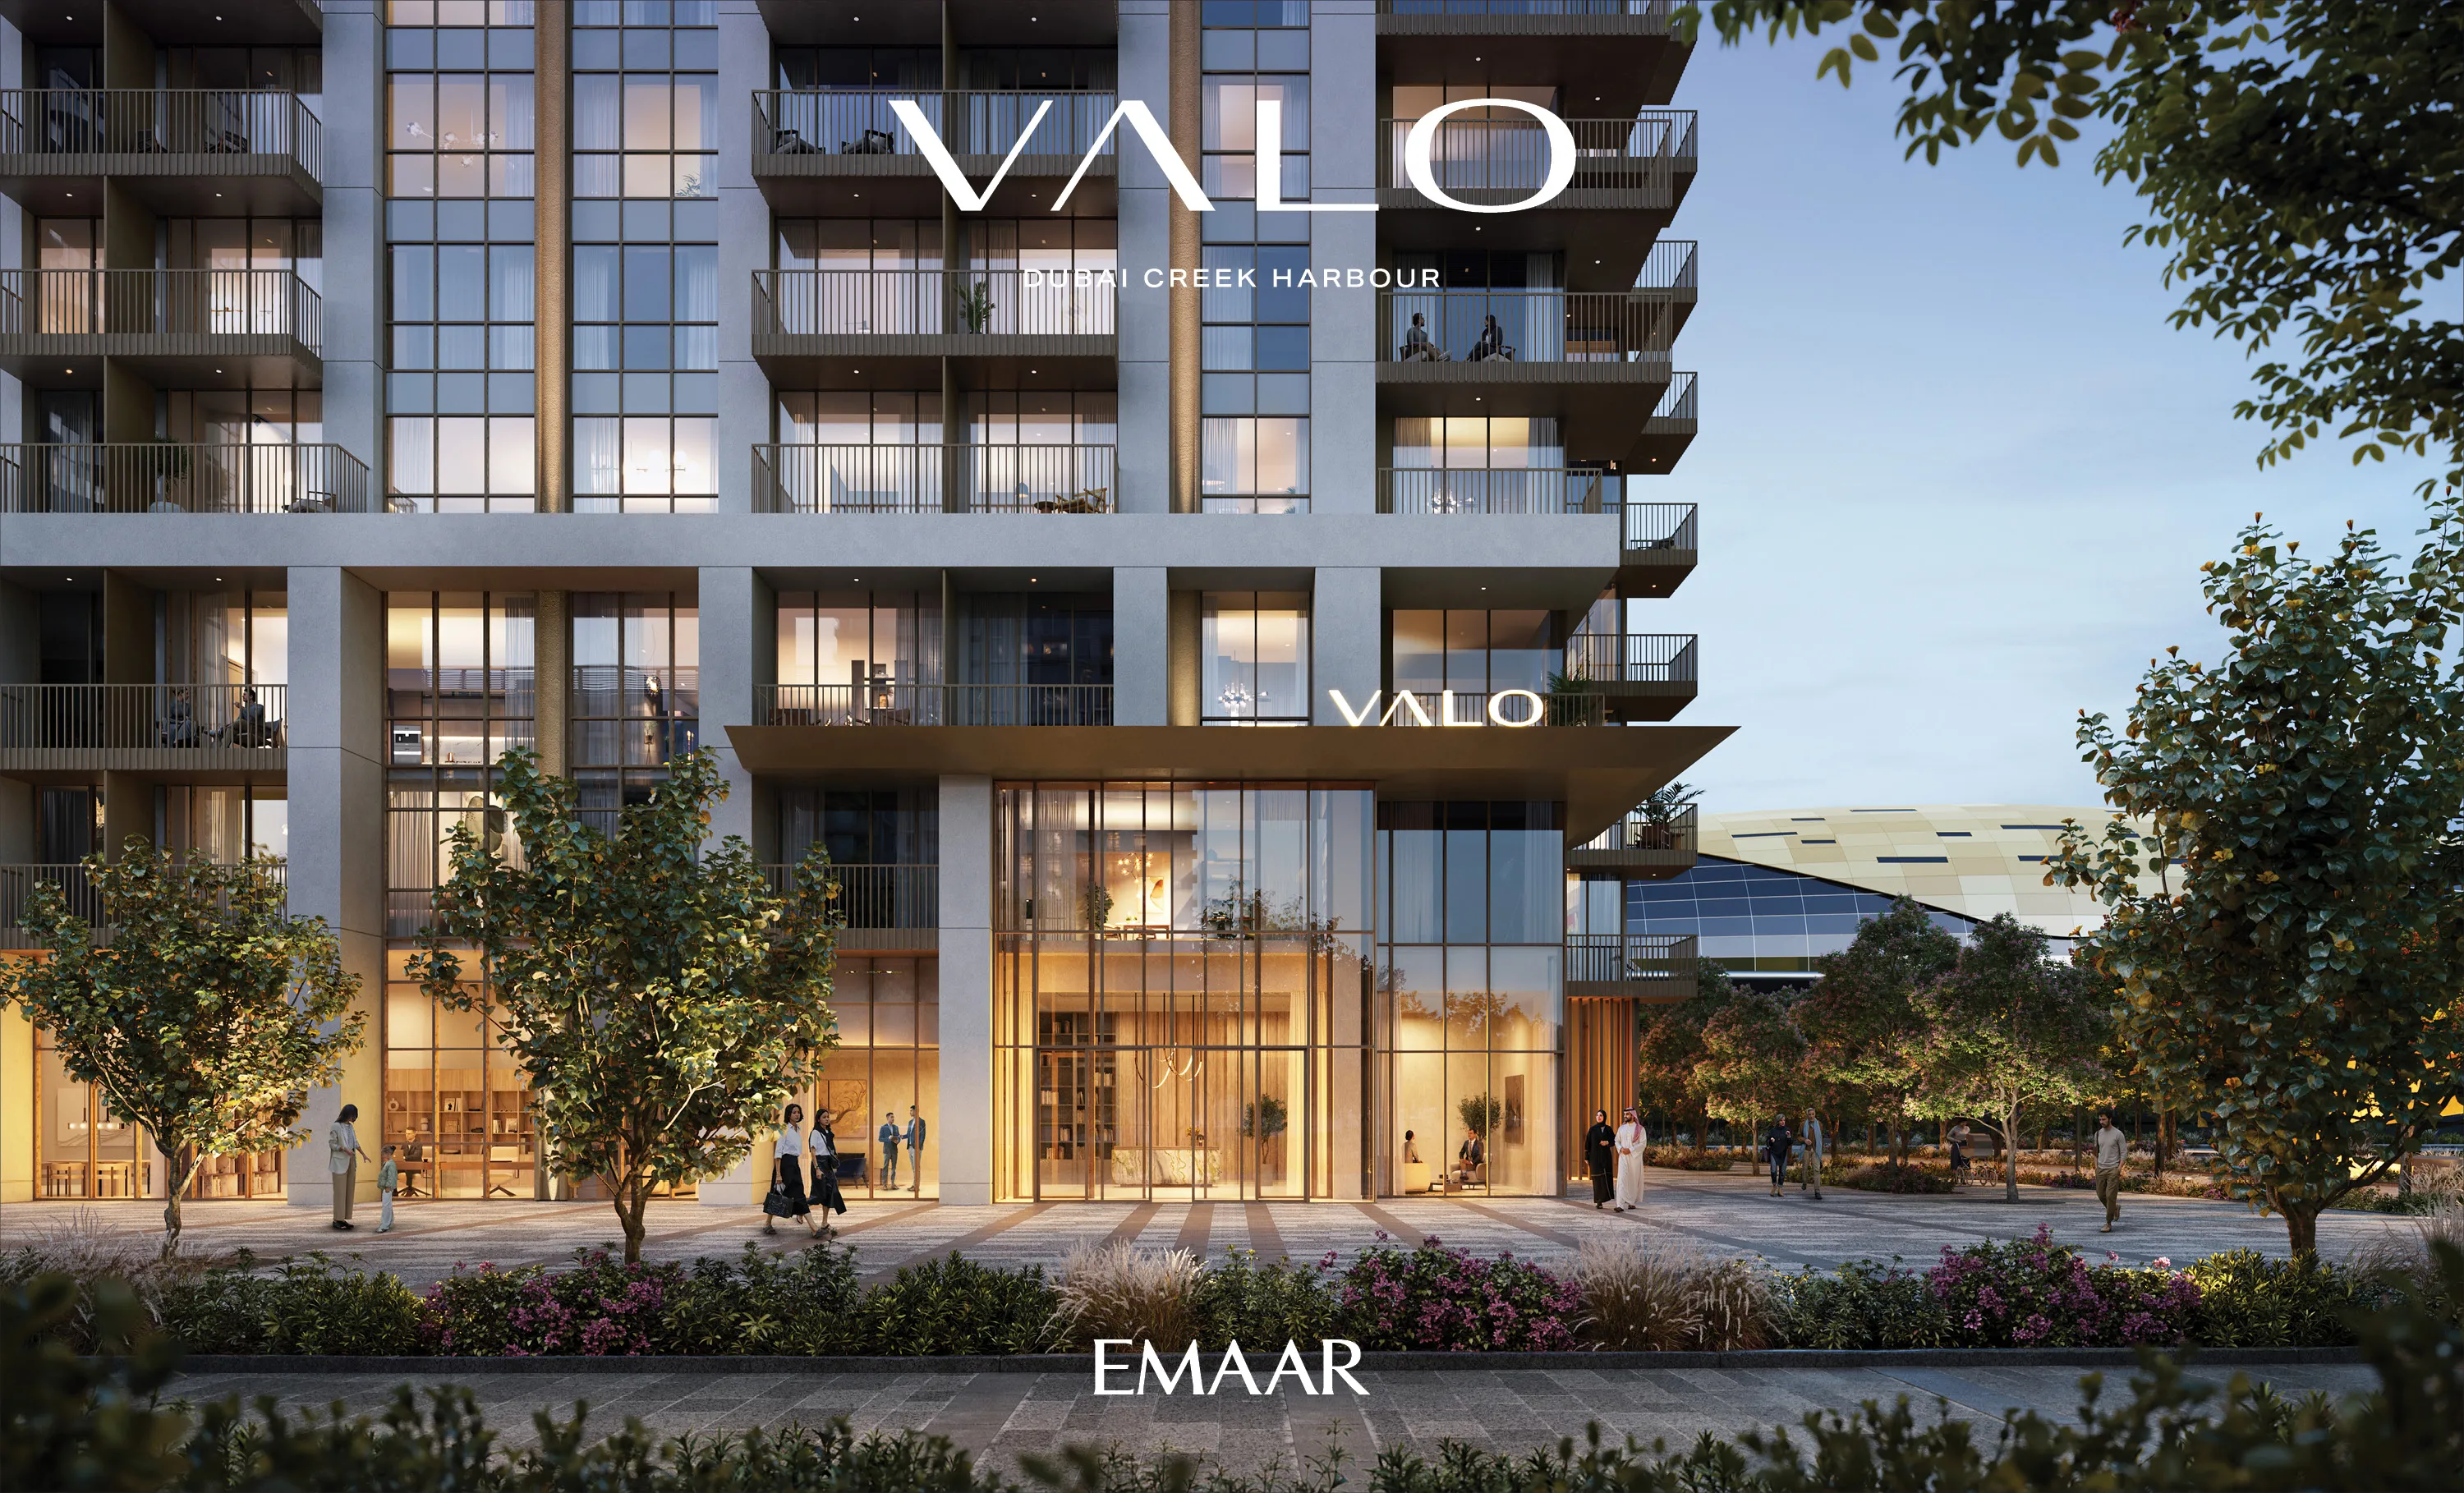 3BR Townhouses for Sale in Valo by Emaar